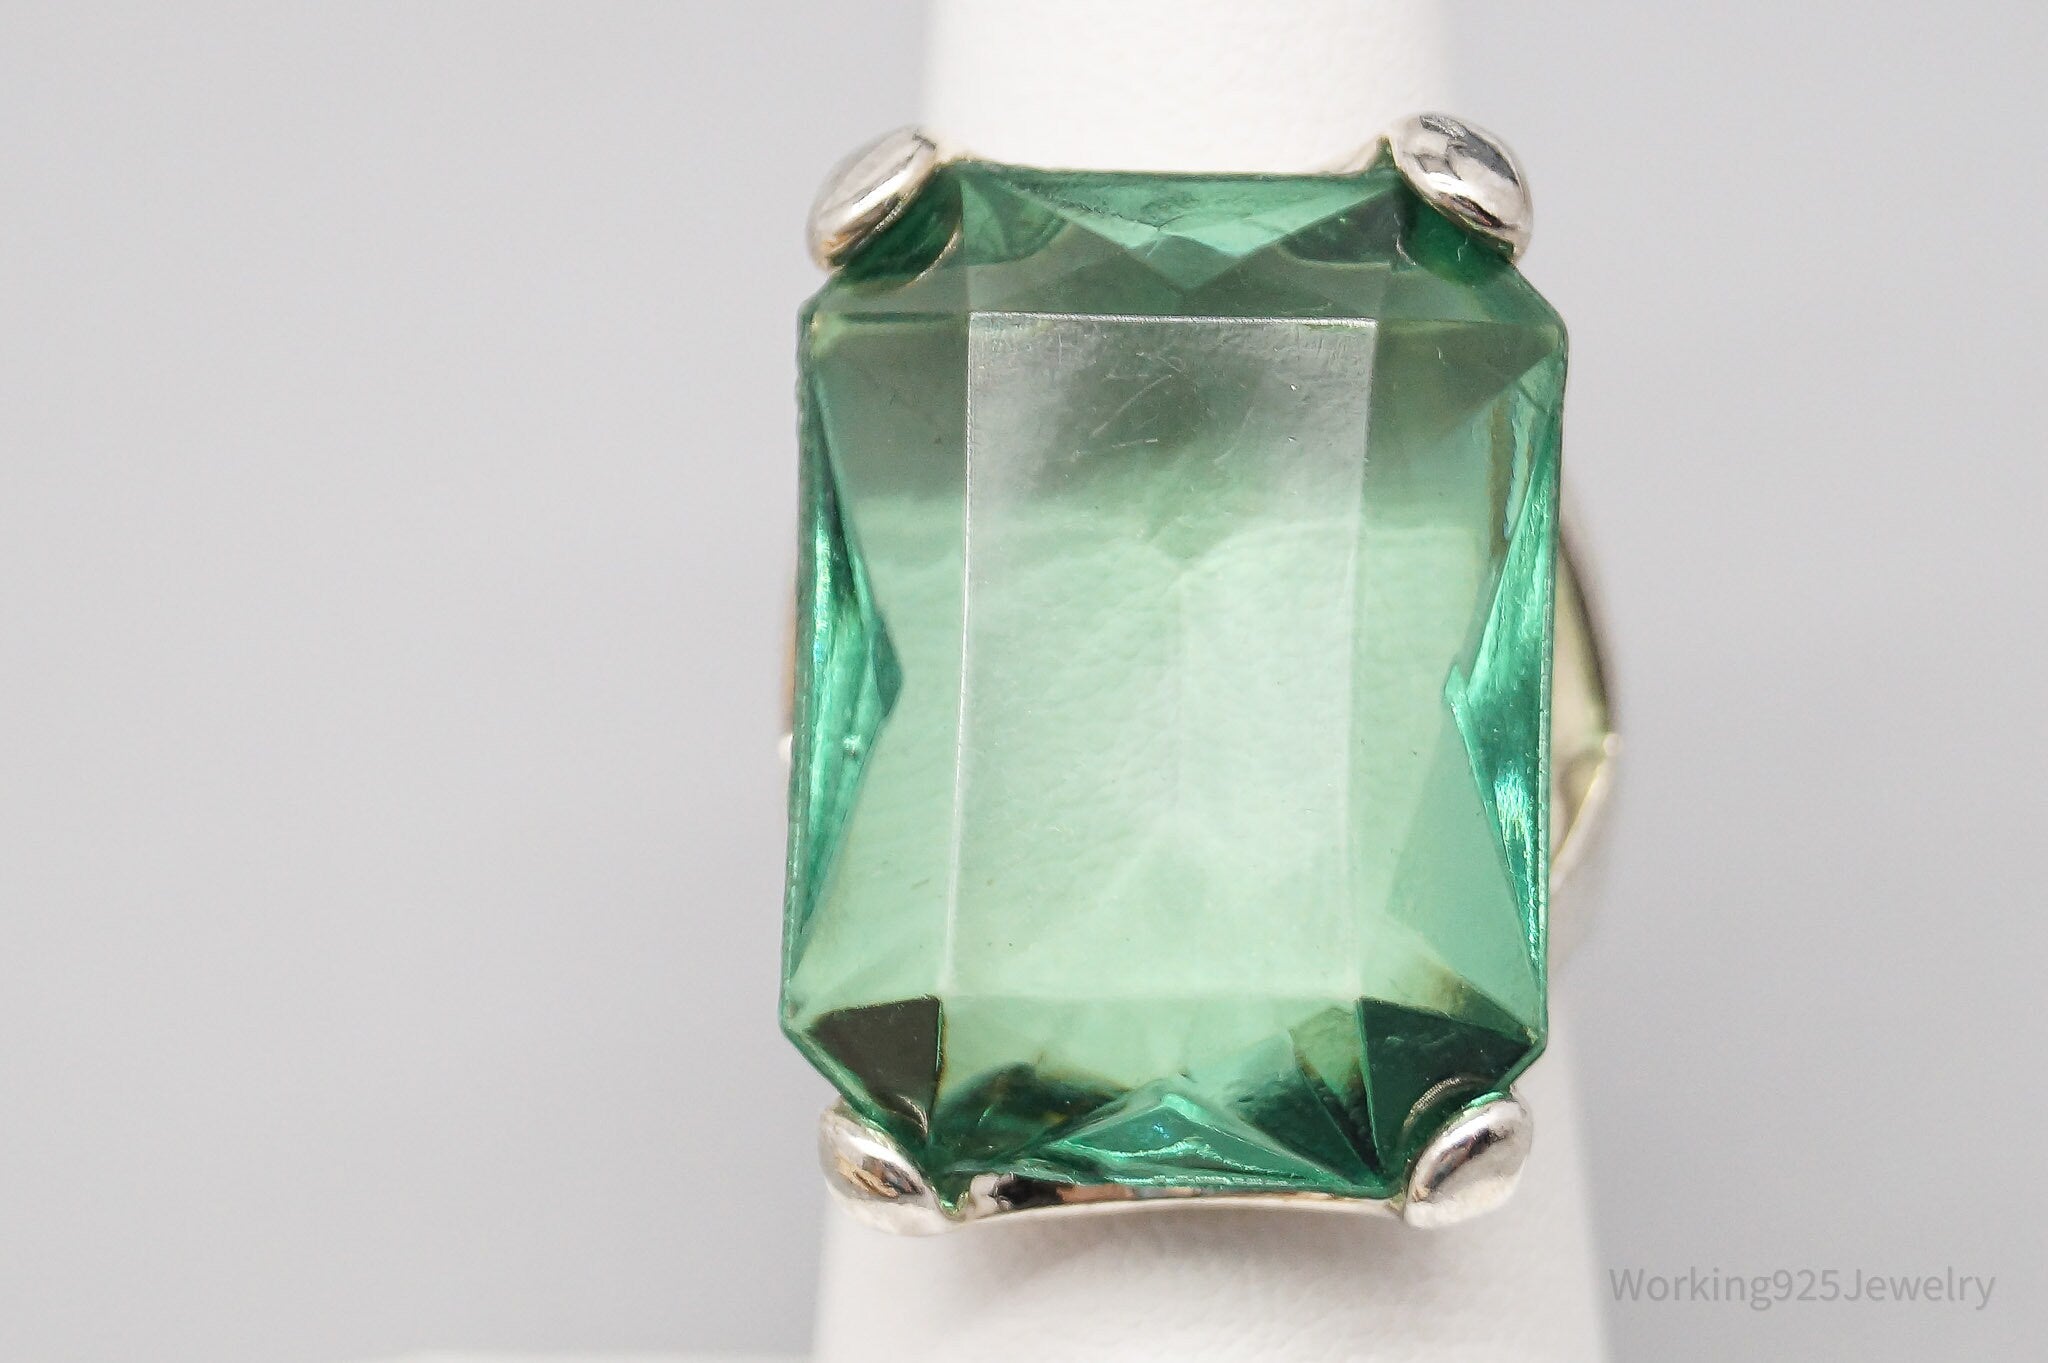 Vintage Faux Plastic Emerald Silver Ring - Size 6.5